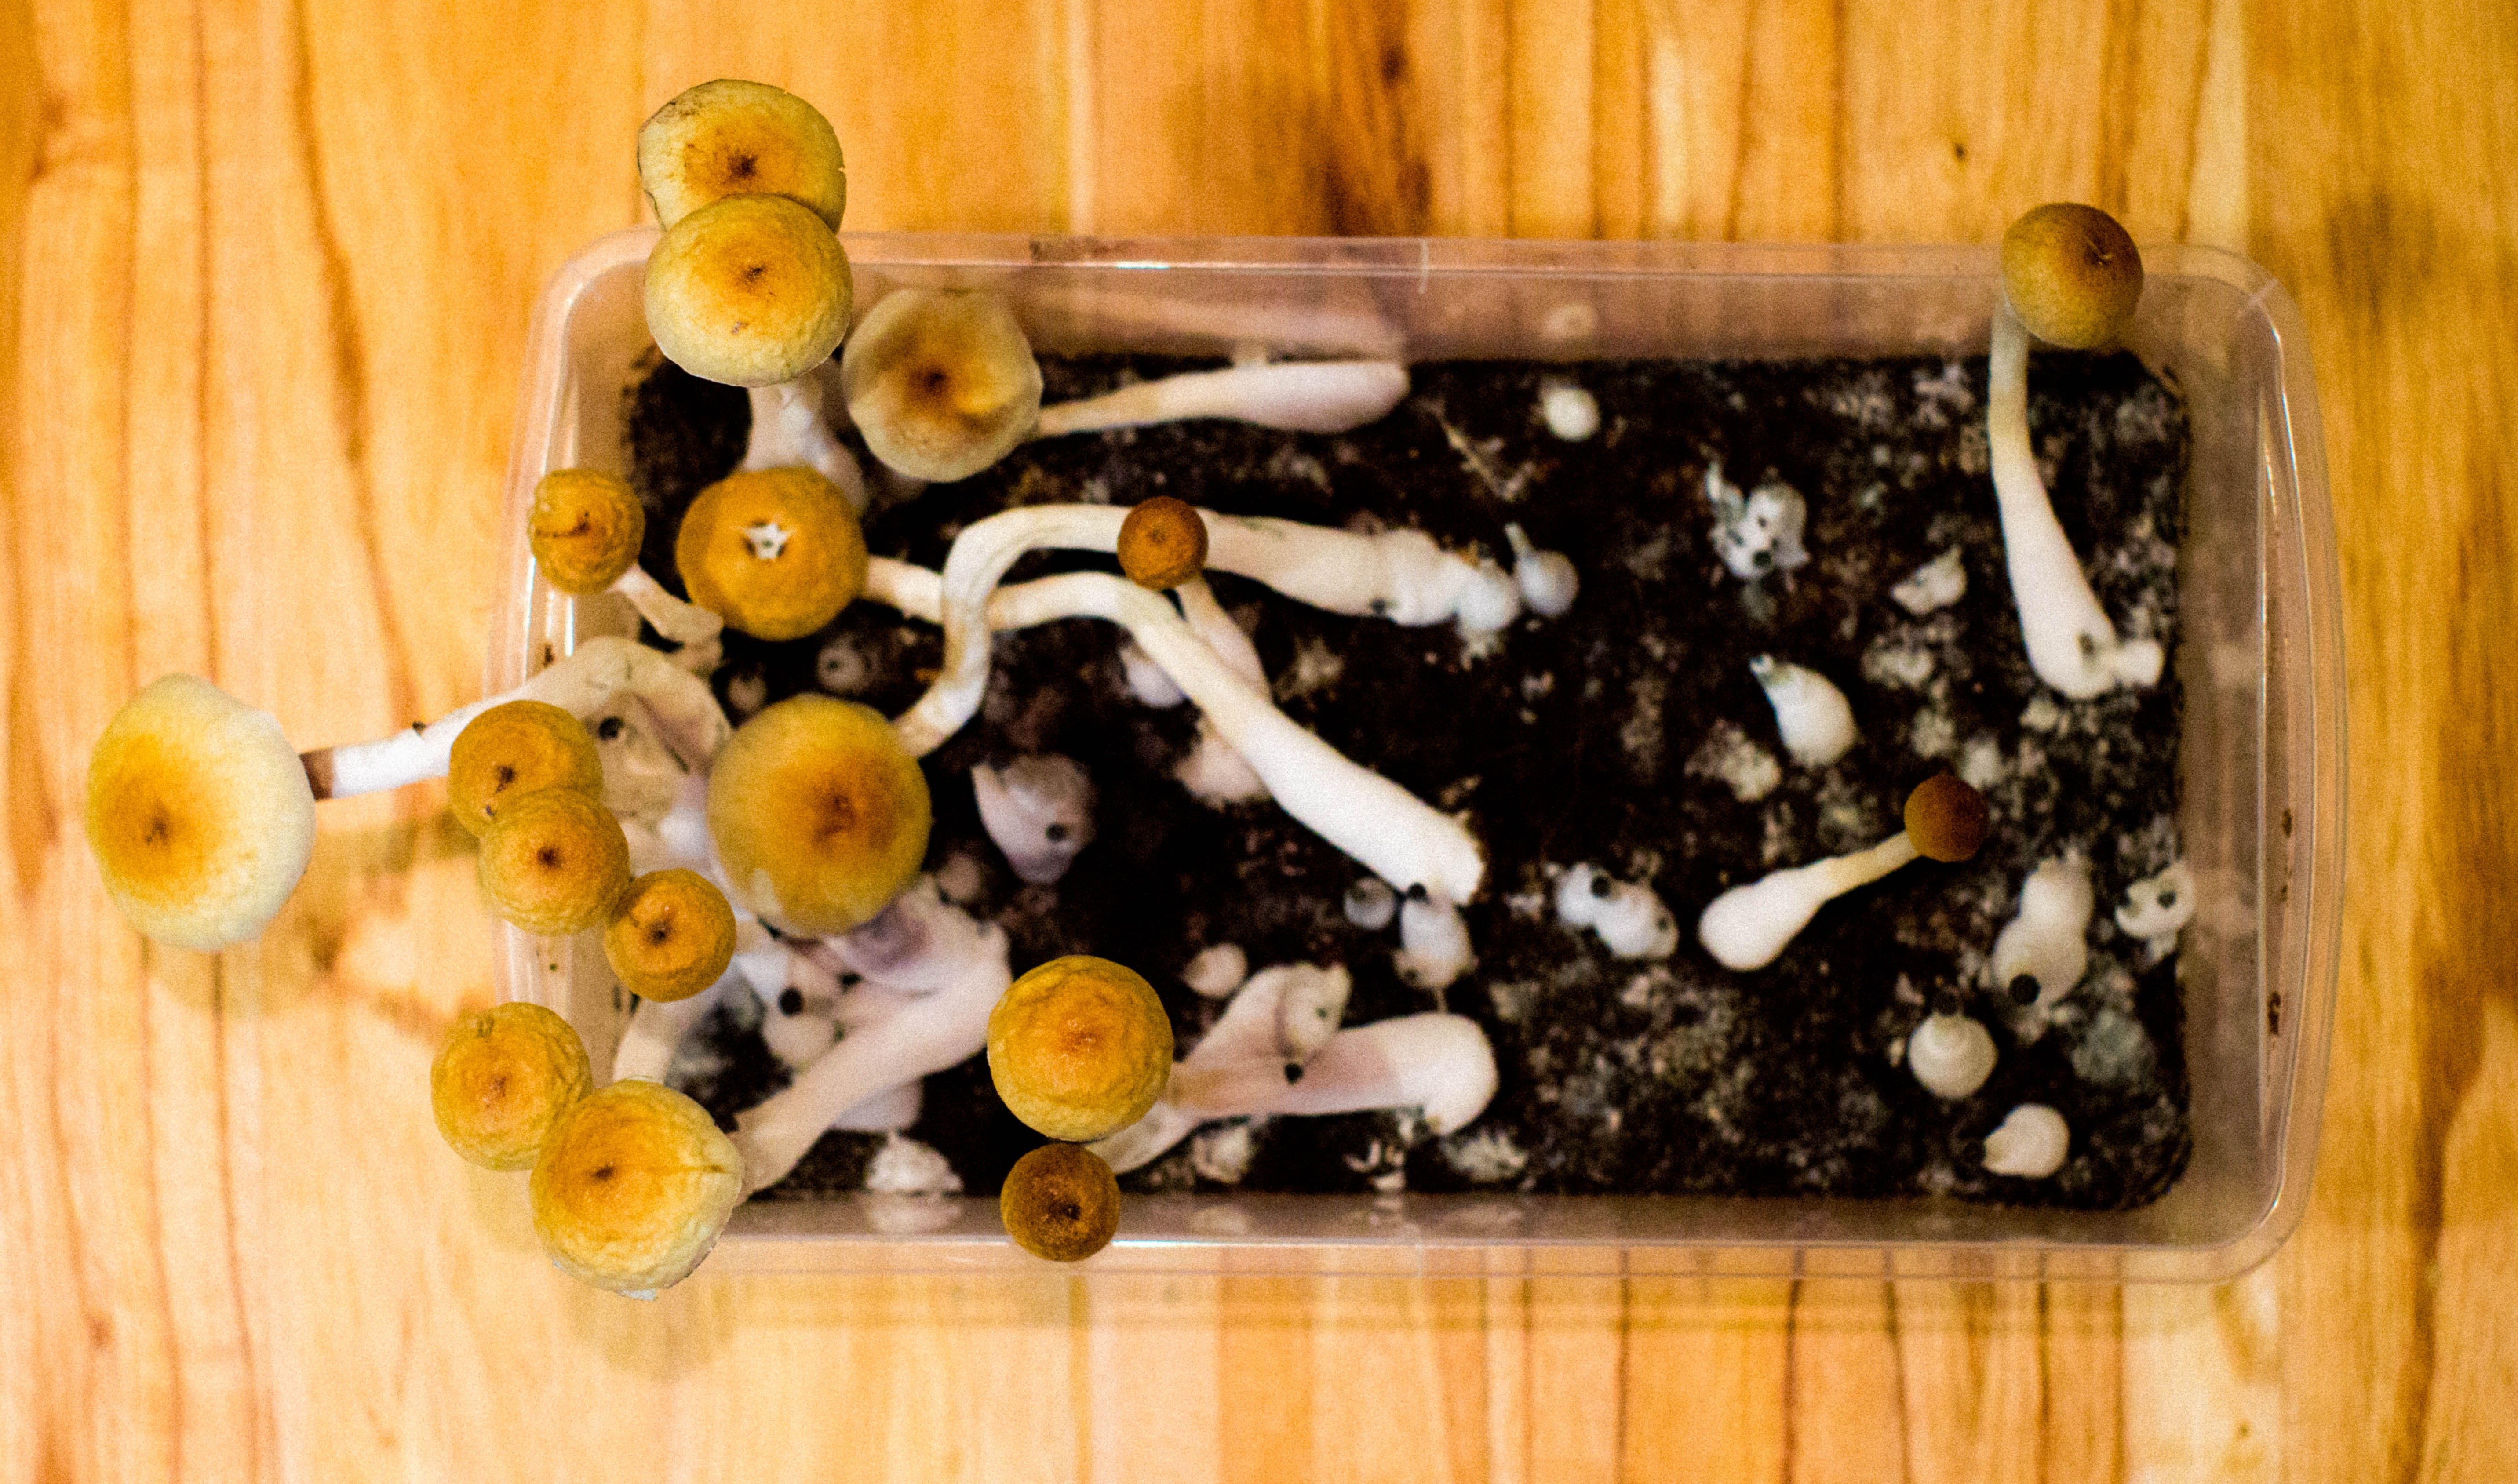 Red Light Holland Buys Virtual Reality Company And Majority Stake In Grow-At-Home Mushroom Company